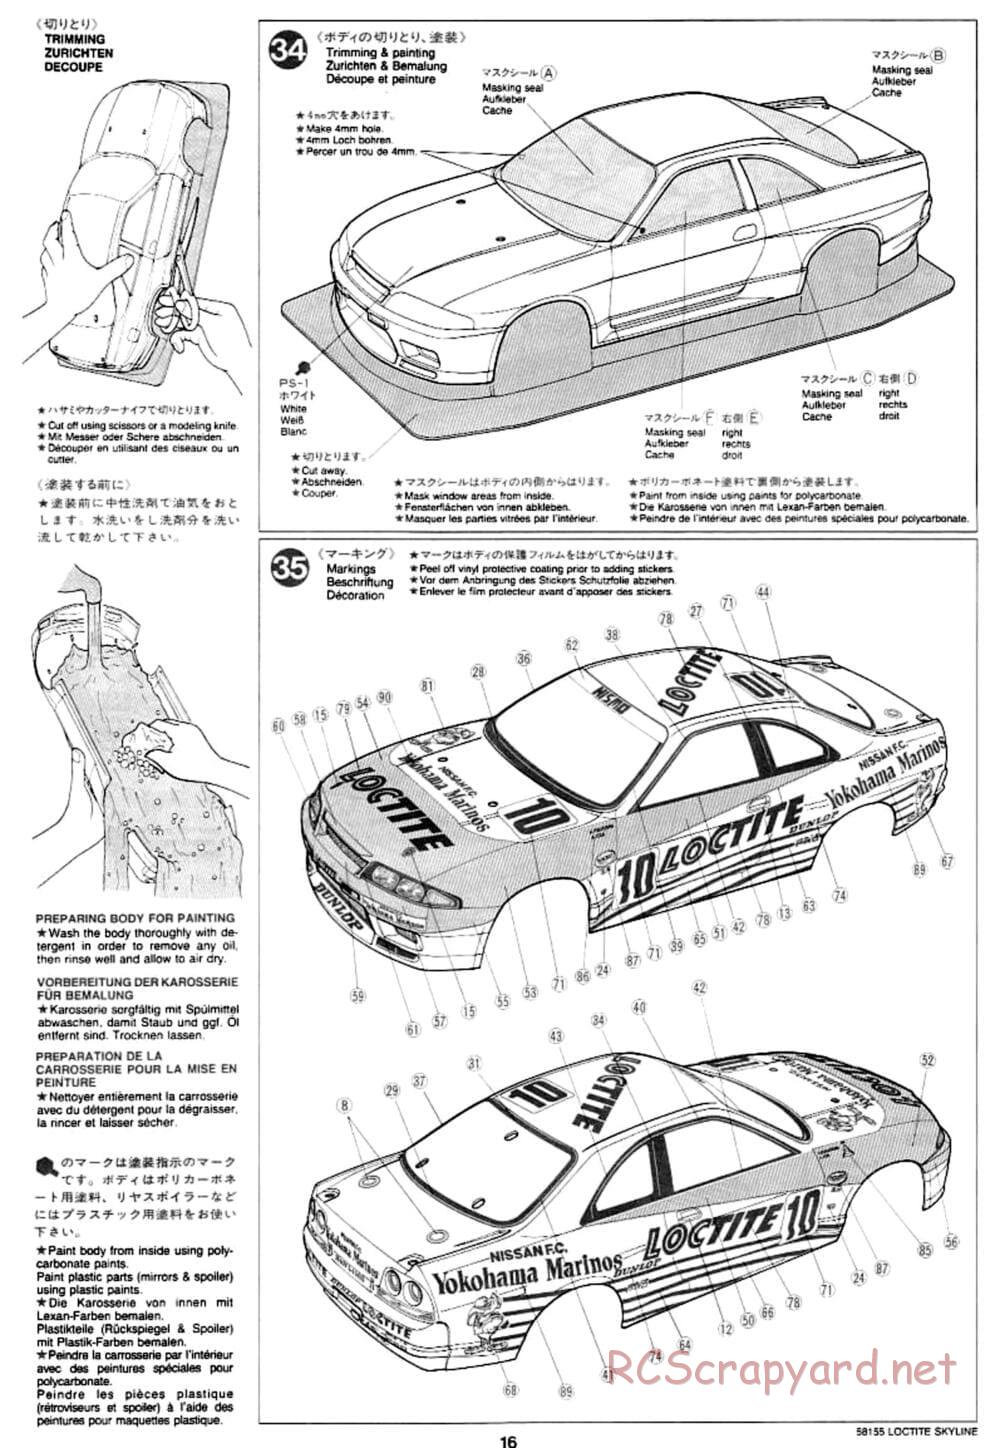 Tamiya - Loctite Nissan Skyline GT-R N1 - TA-02 Chassis - Manual - Page 16